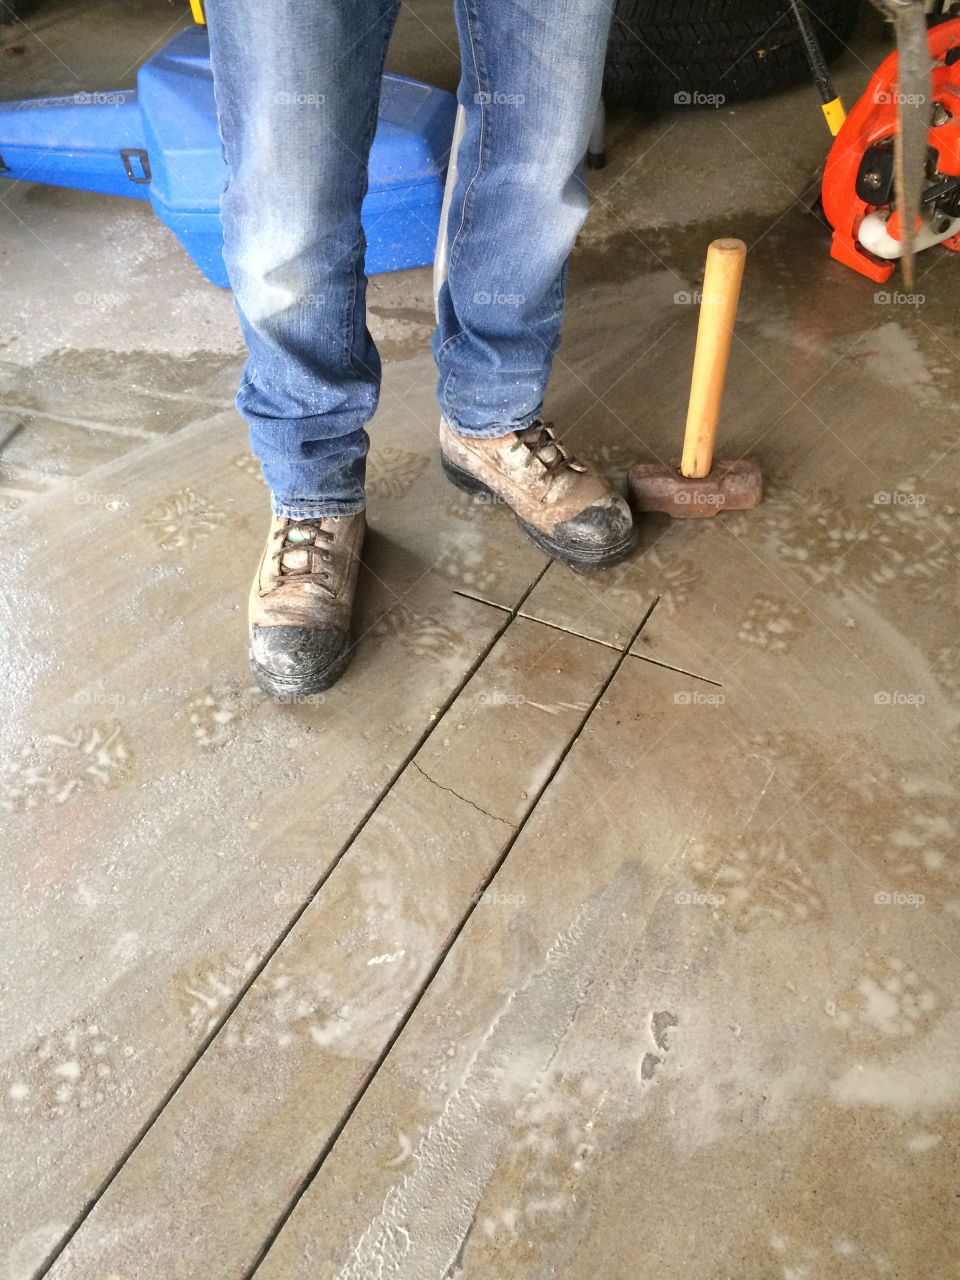 Love using new tools - rented a cool gas powered saw to cut a garage floor drain